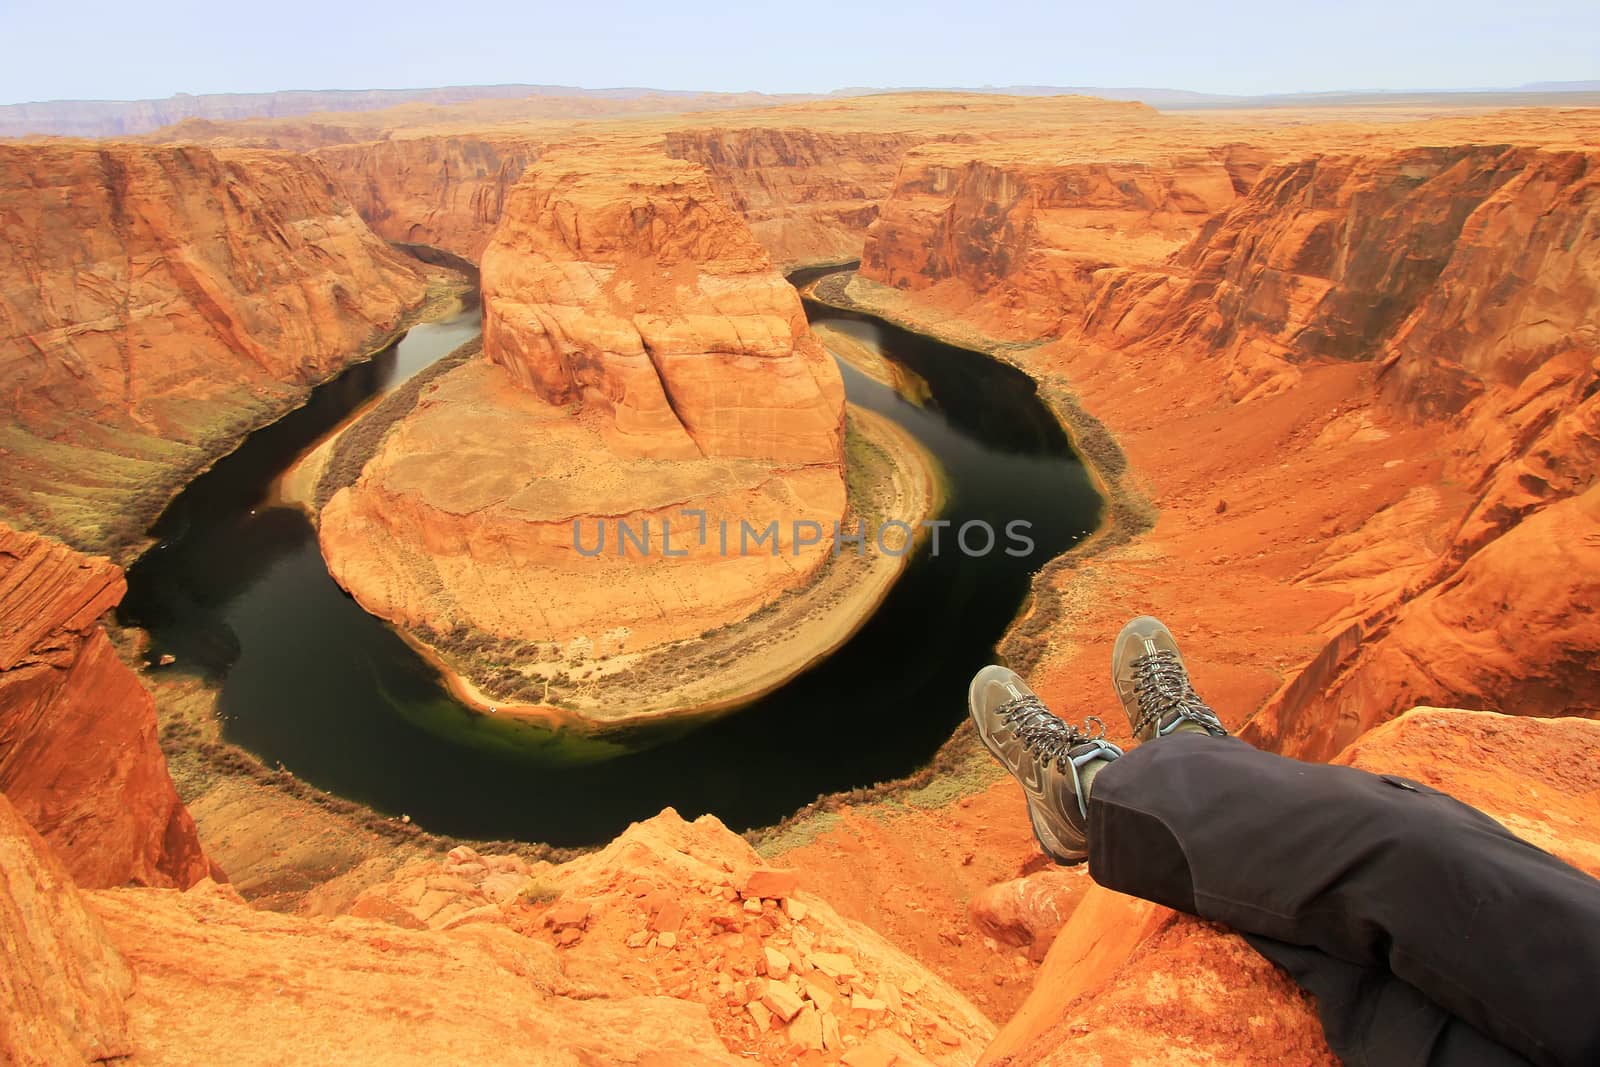 Pair of legs at Horseshoe bend overlook, adventure concept  by donya_nedomam